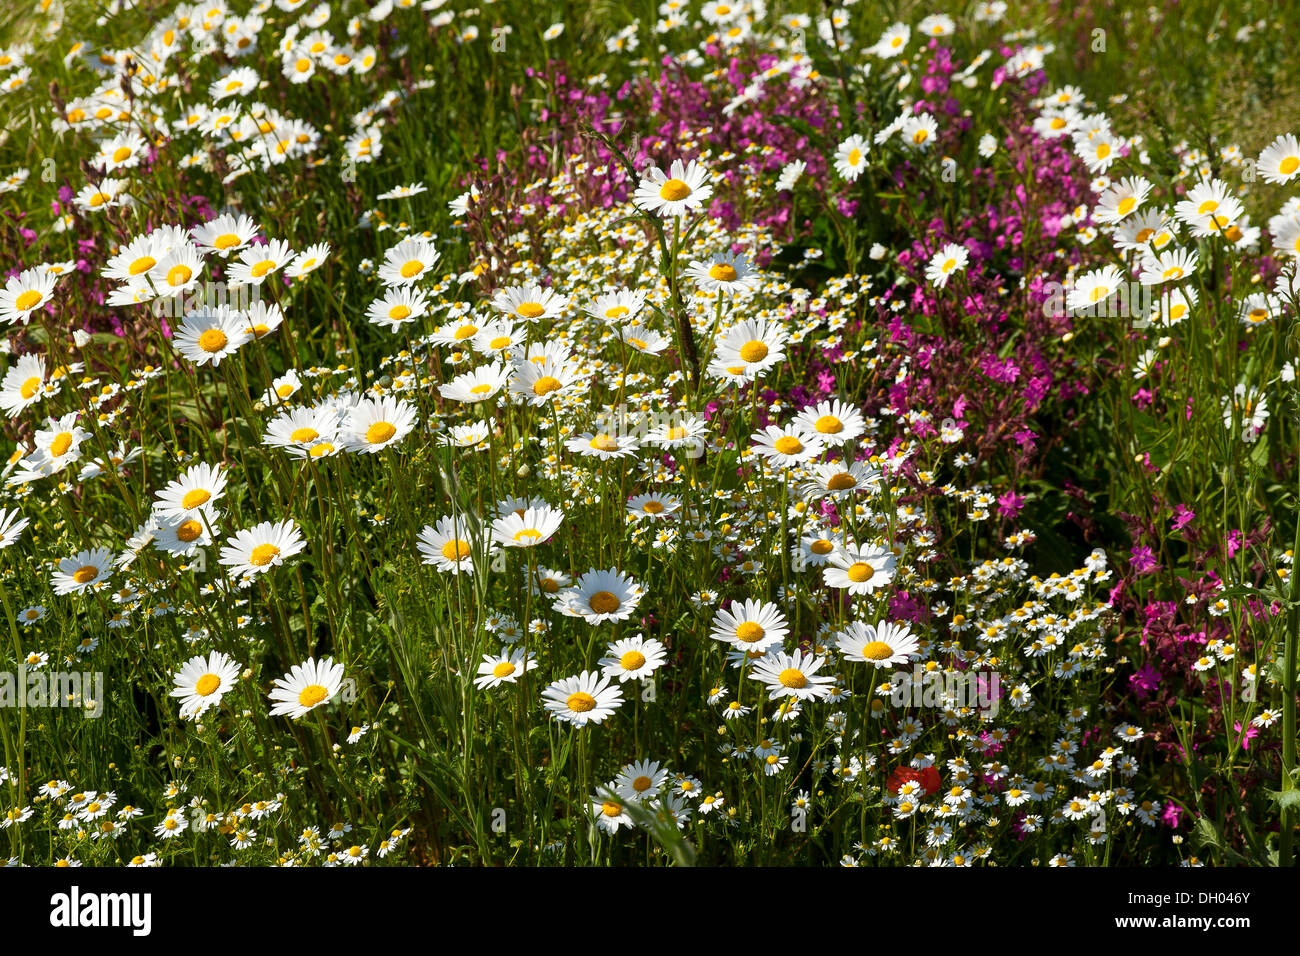 Oxeye Daisies (Leucanthemum vulgare), Red Campion (Silene dioica) and Scented Mayweed or German Chamomile (Matricaria Stock Photo